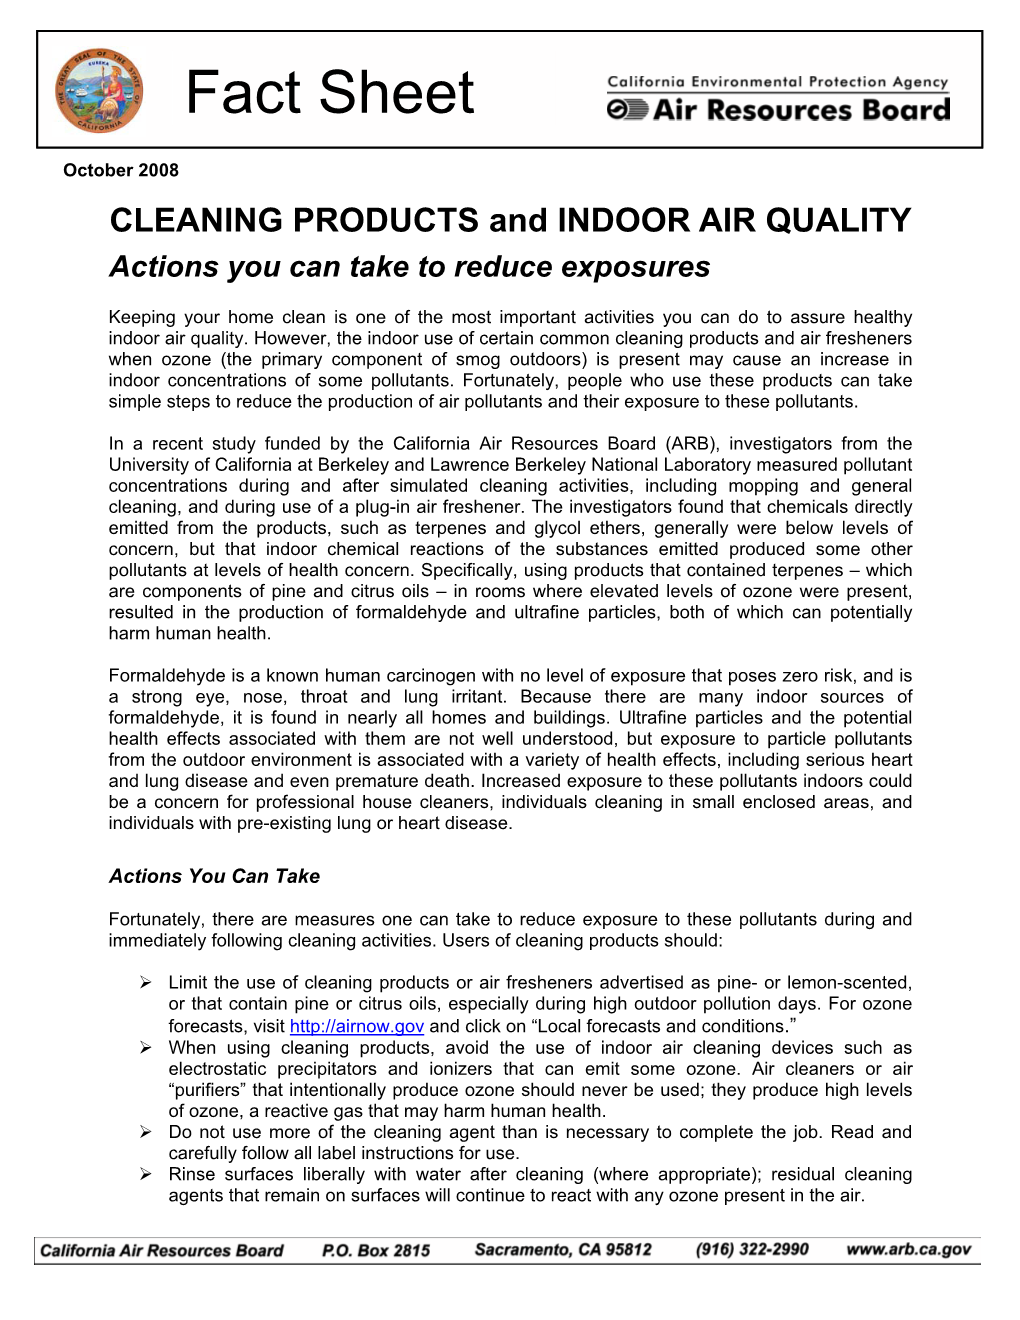 CLEANING PRODUCTS and INDOOR AIR QUALITY Actions You Can Take to Reduce Exposures